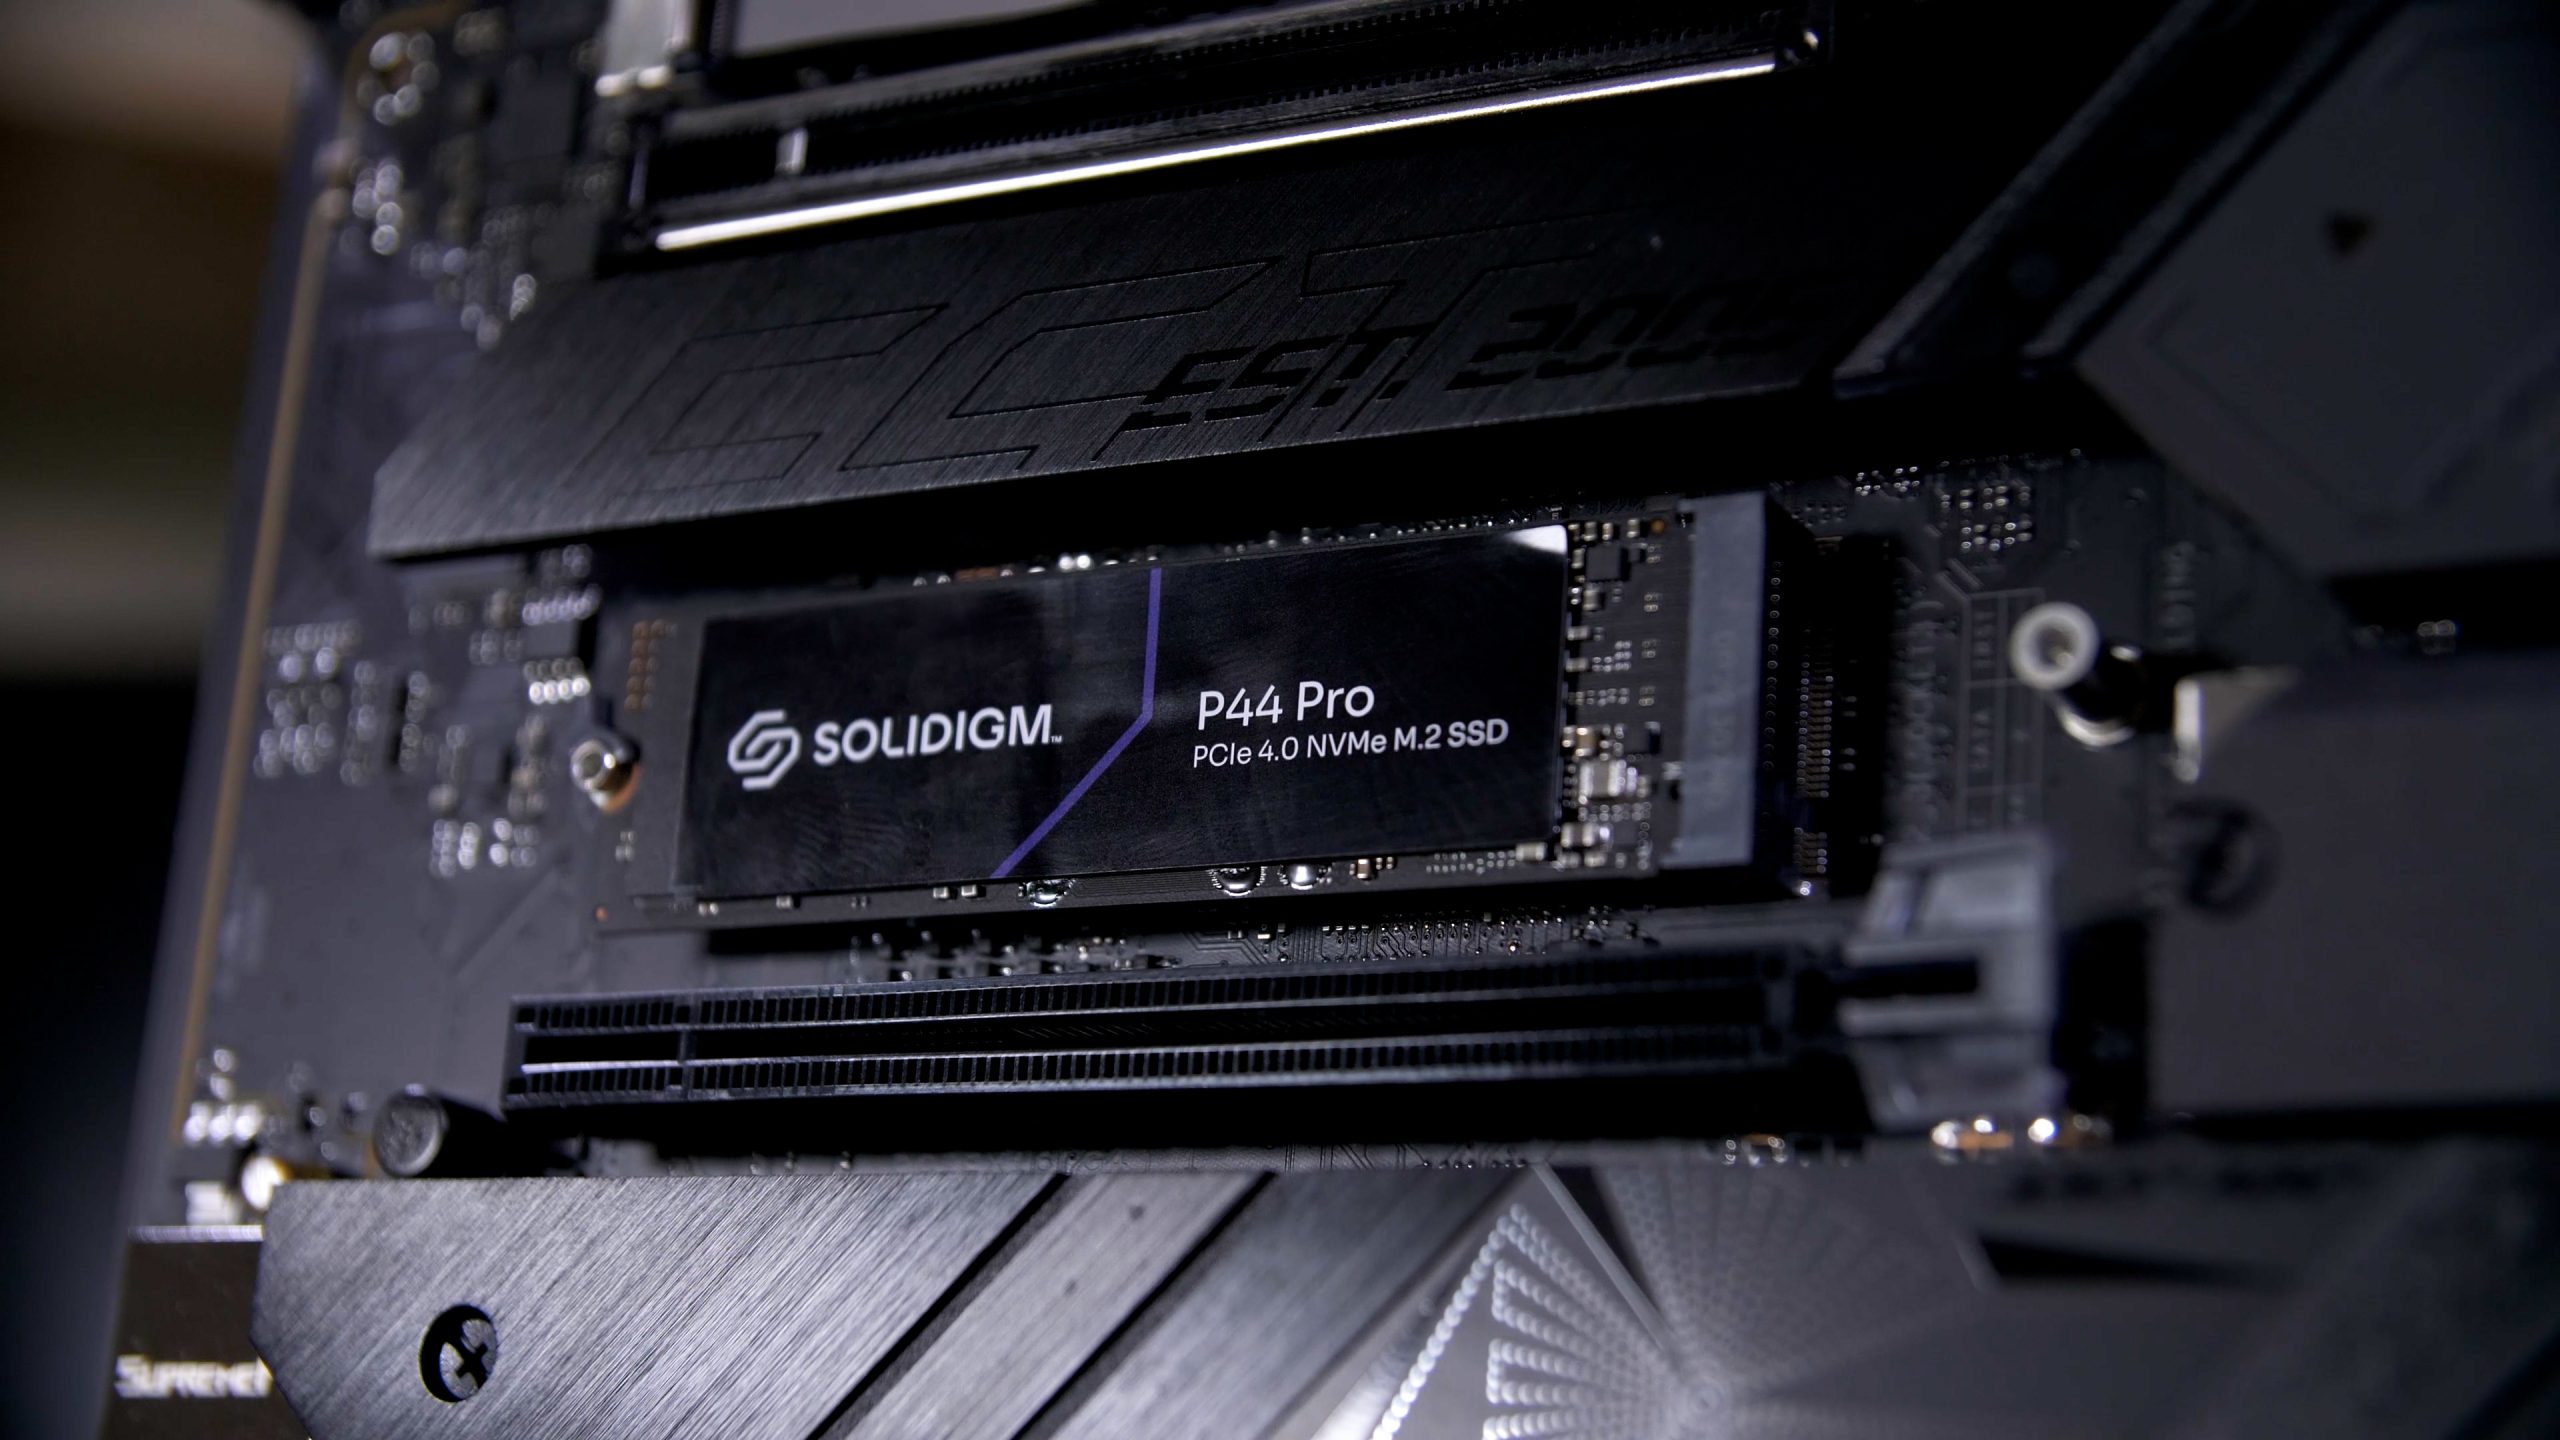 Solidigm 670p Series SSD  Solidigm SSDs for Laptops and Desktop Computers